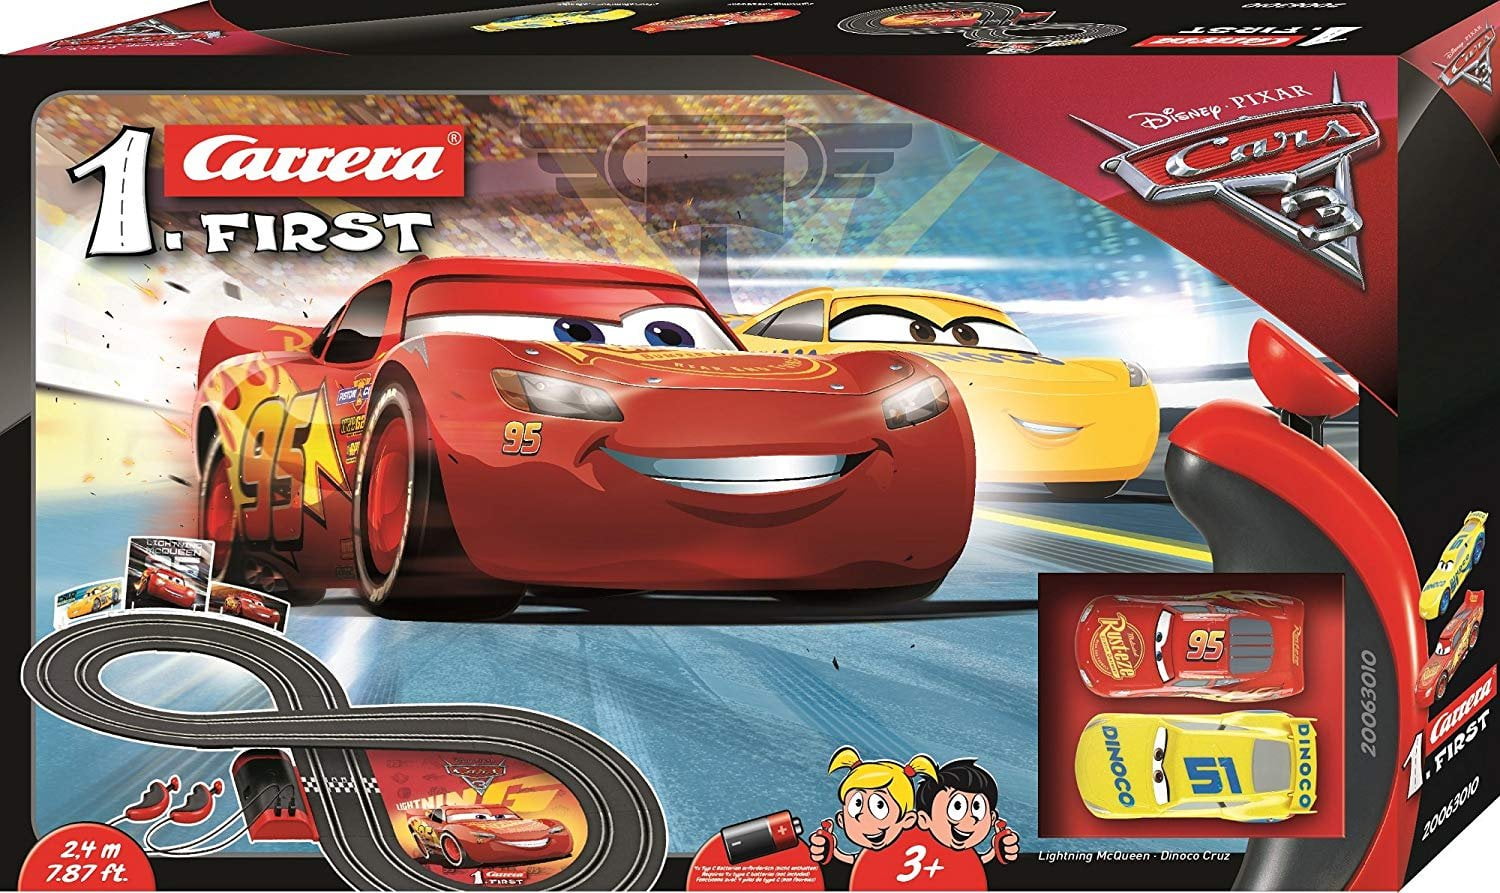 Carrera First Disney/Pixar Cars 3 - Slot Car Race Track - Includes 2 cars:  Lightning McQueen and Dinoco Cruz - Battery-Powered Beginner Racing Set for  Kids Ages 3 Years and Up 